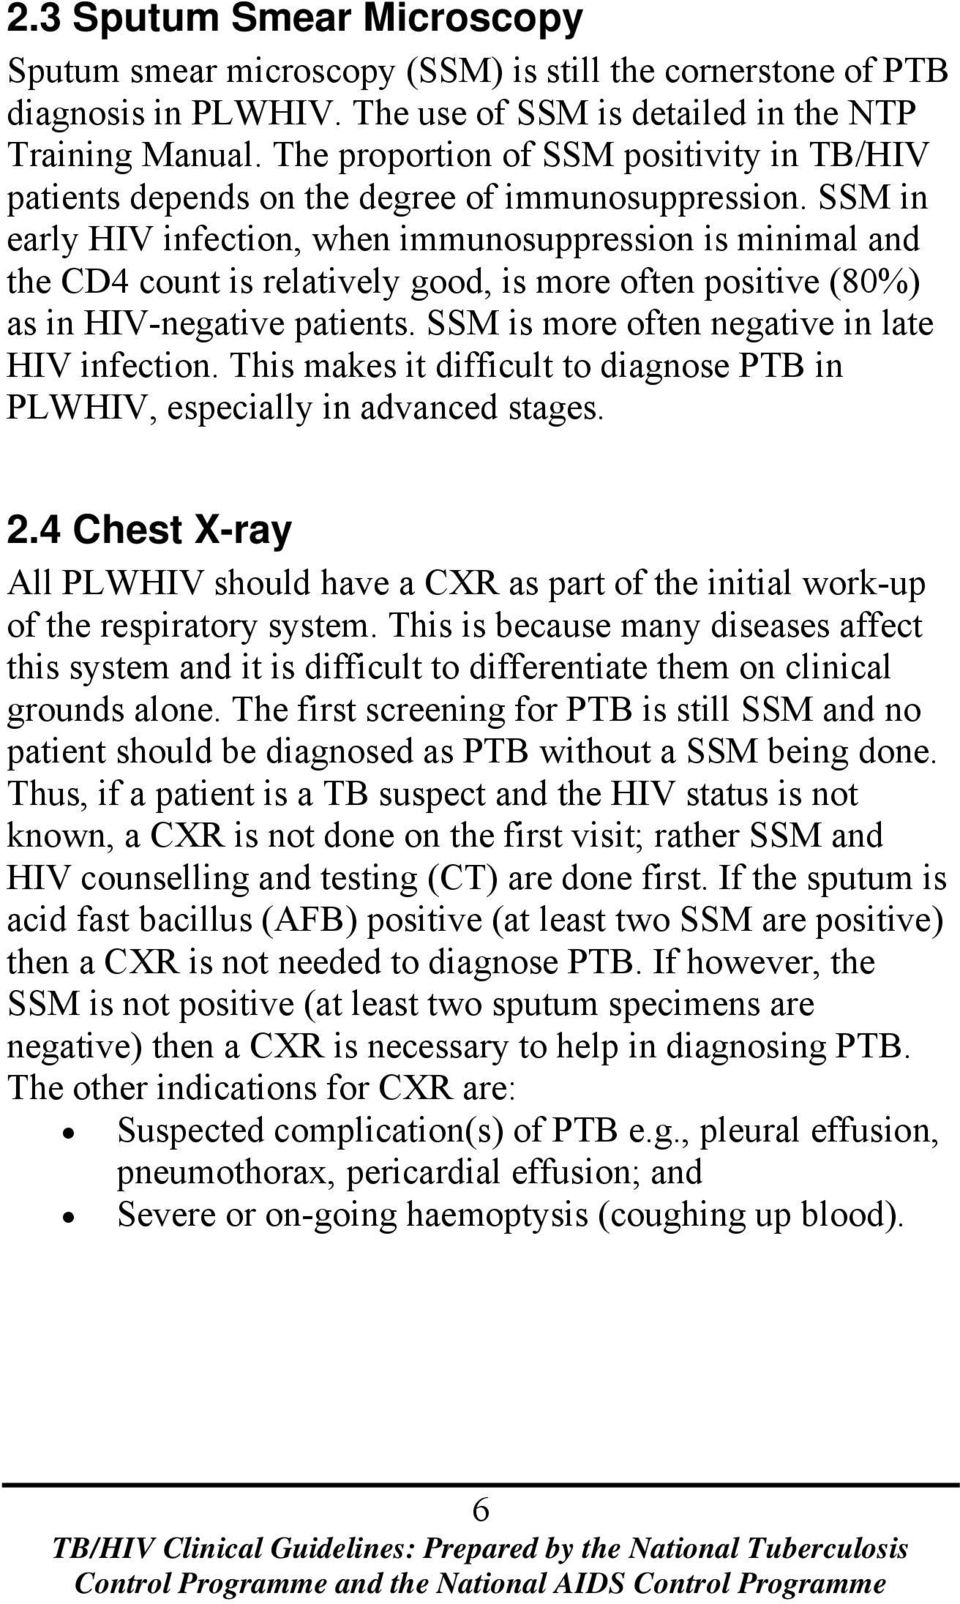 SSM in early HIV infection, when immunosuppression is minimal and the CD4 count is relatively good, is more often positive (80%) as in HIV-negative patients.